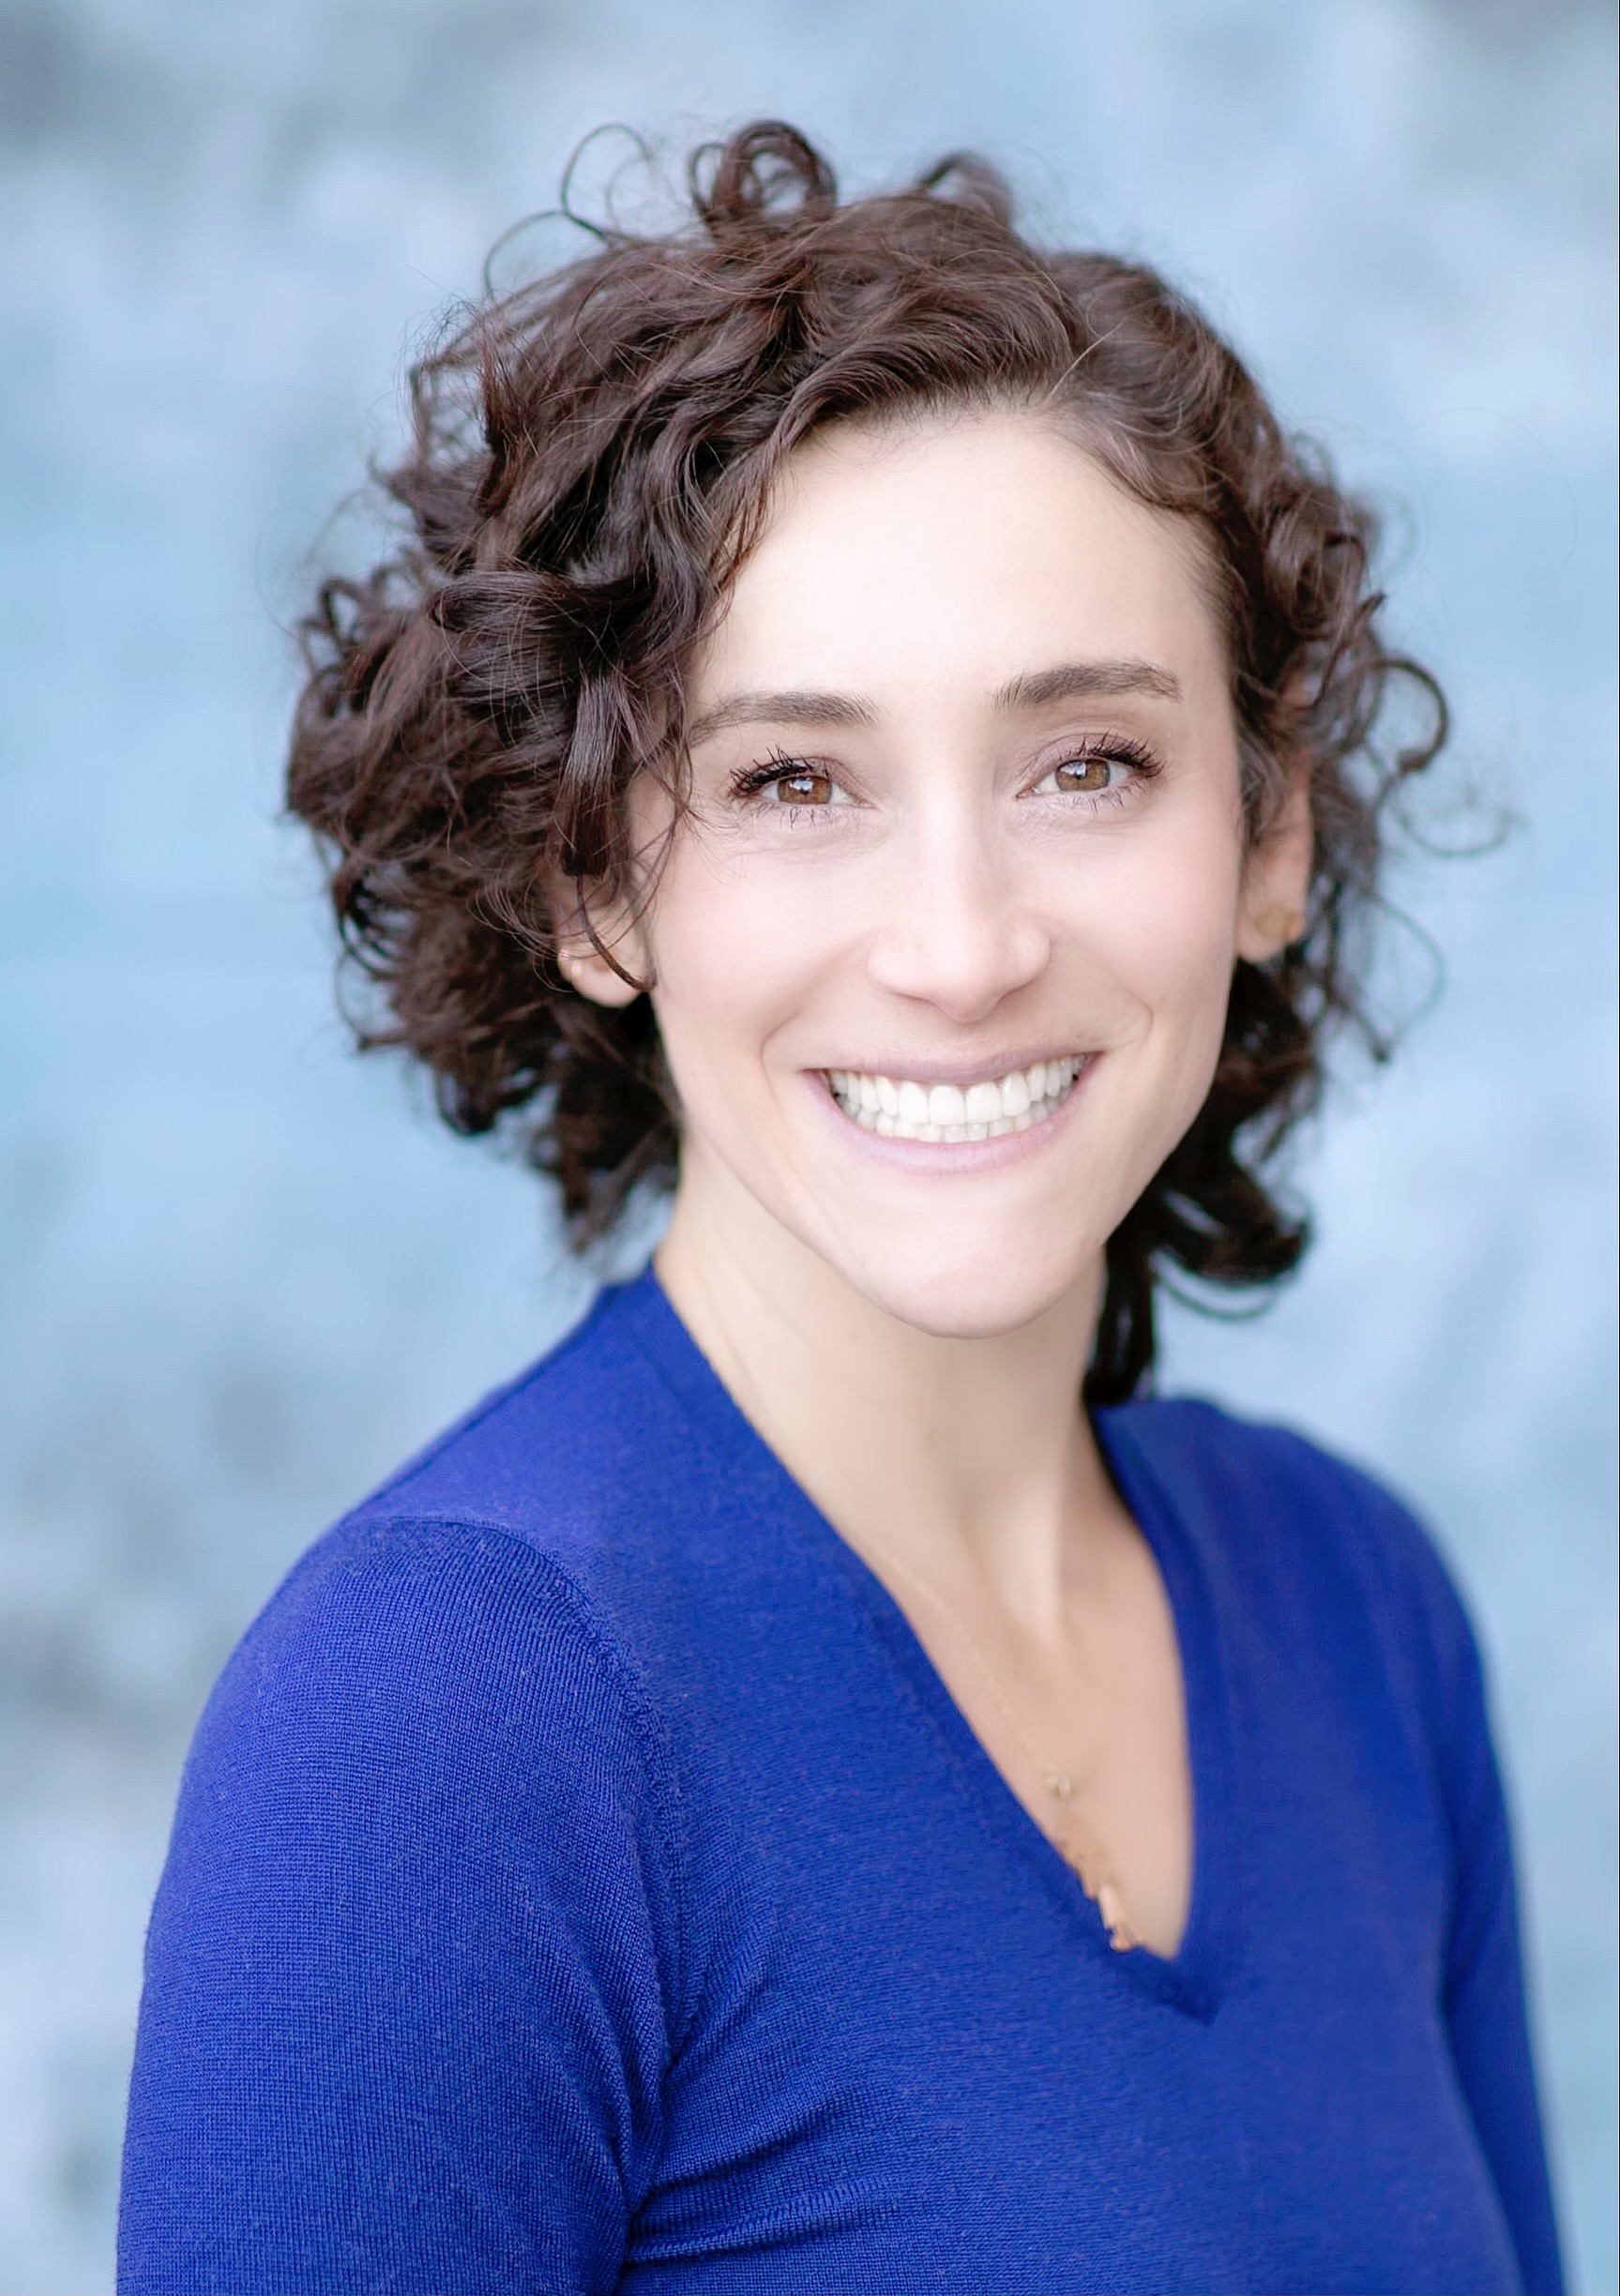 Catching Up with Molly Mills | American Jewish University